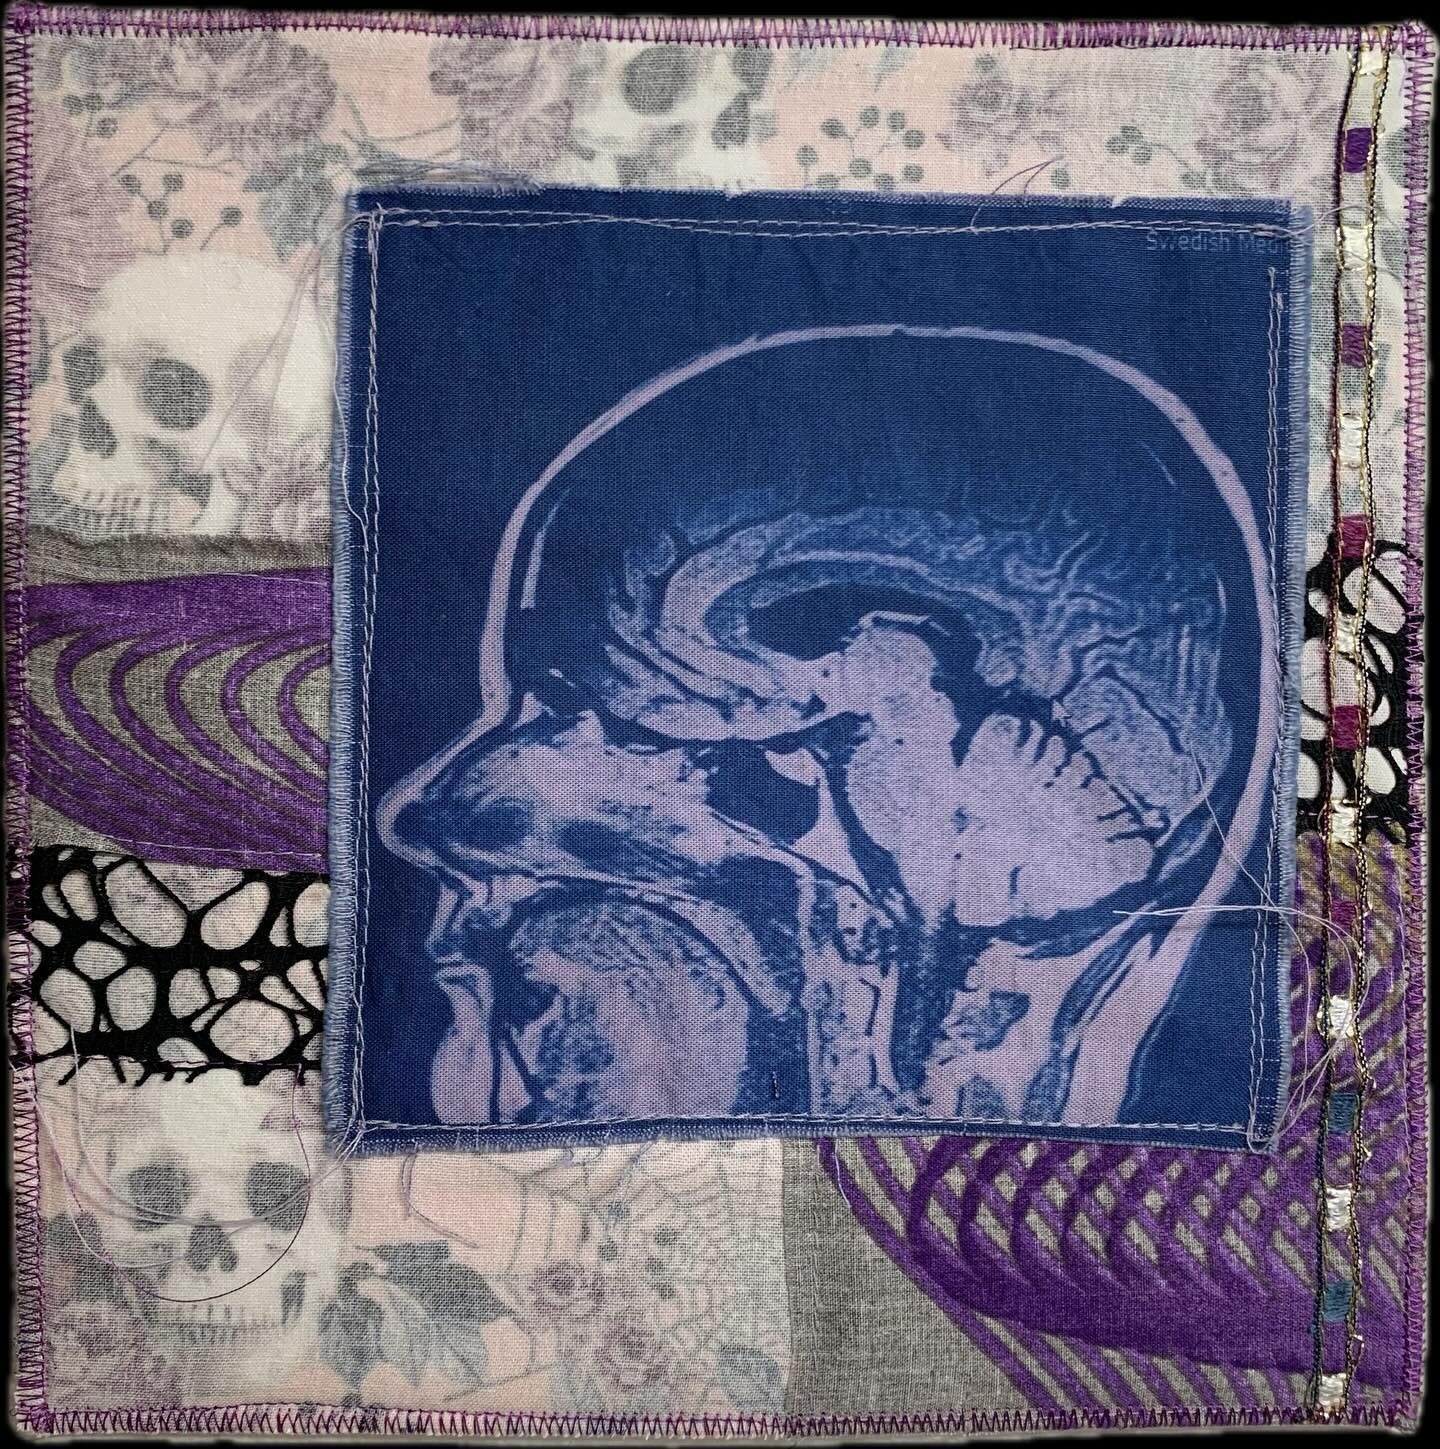 Come see my cyanotype MRI self portraits showing at the Holiday Bizarre at The Palace Gallery @the_palace_gallery!! Opens Friday night, Dec 1st. I&rsquo;ll be there from 6-7:00pm. These beauties are going for $87.78 each,super low pricing, as my holi